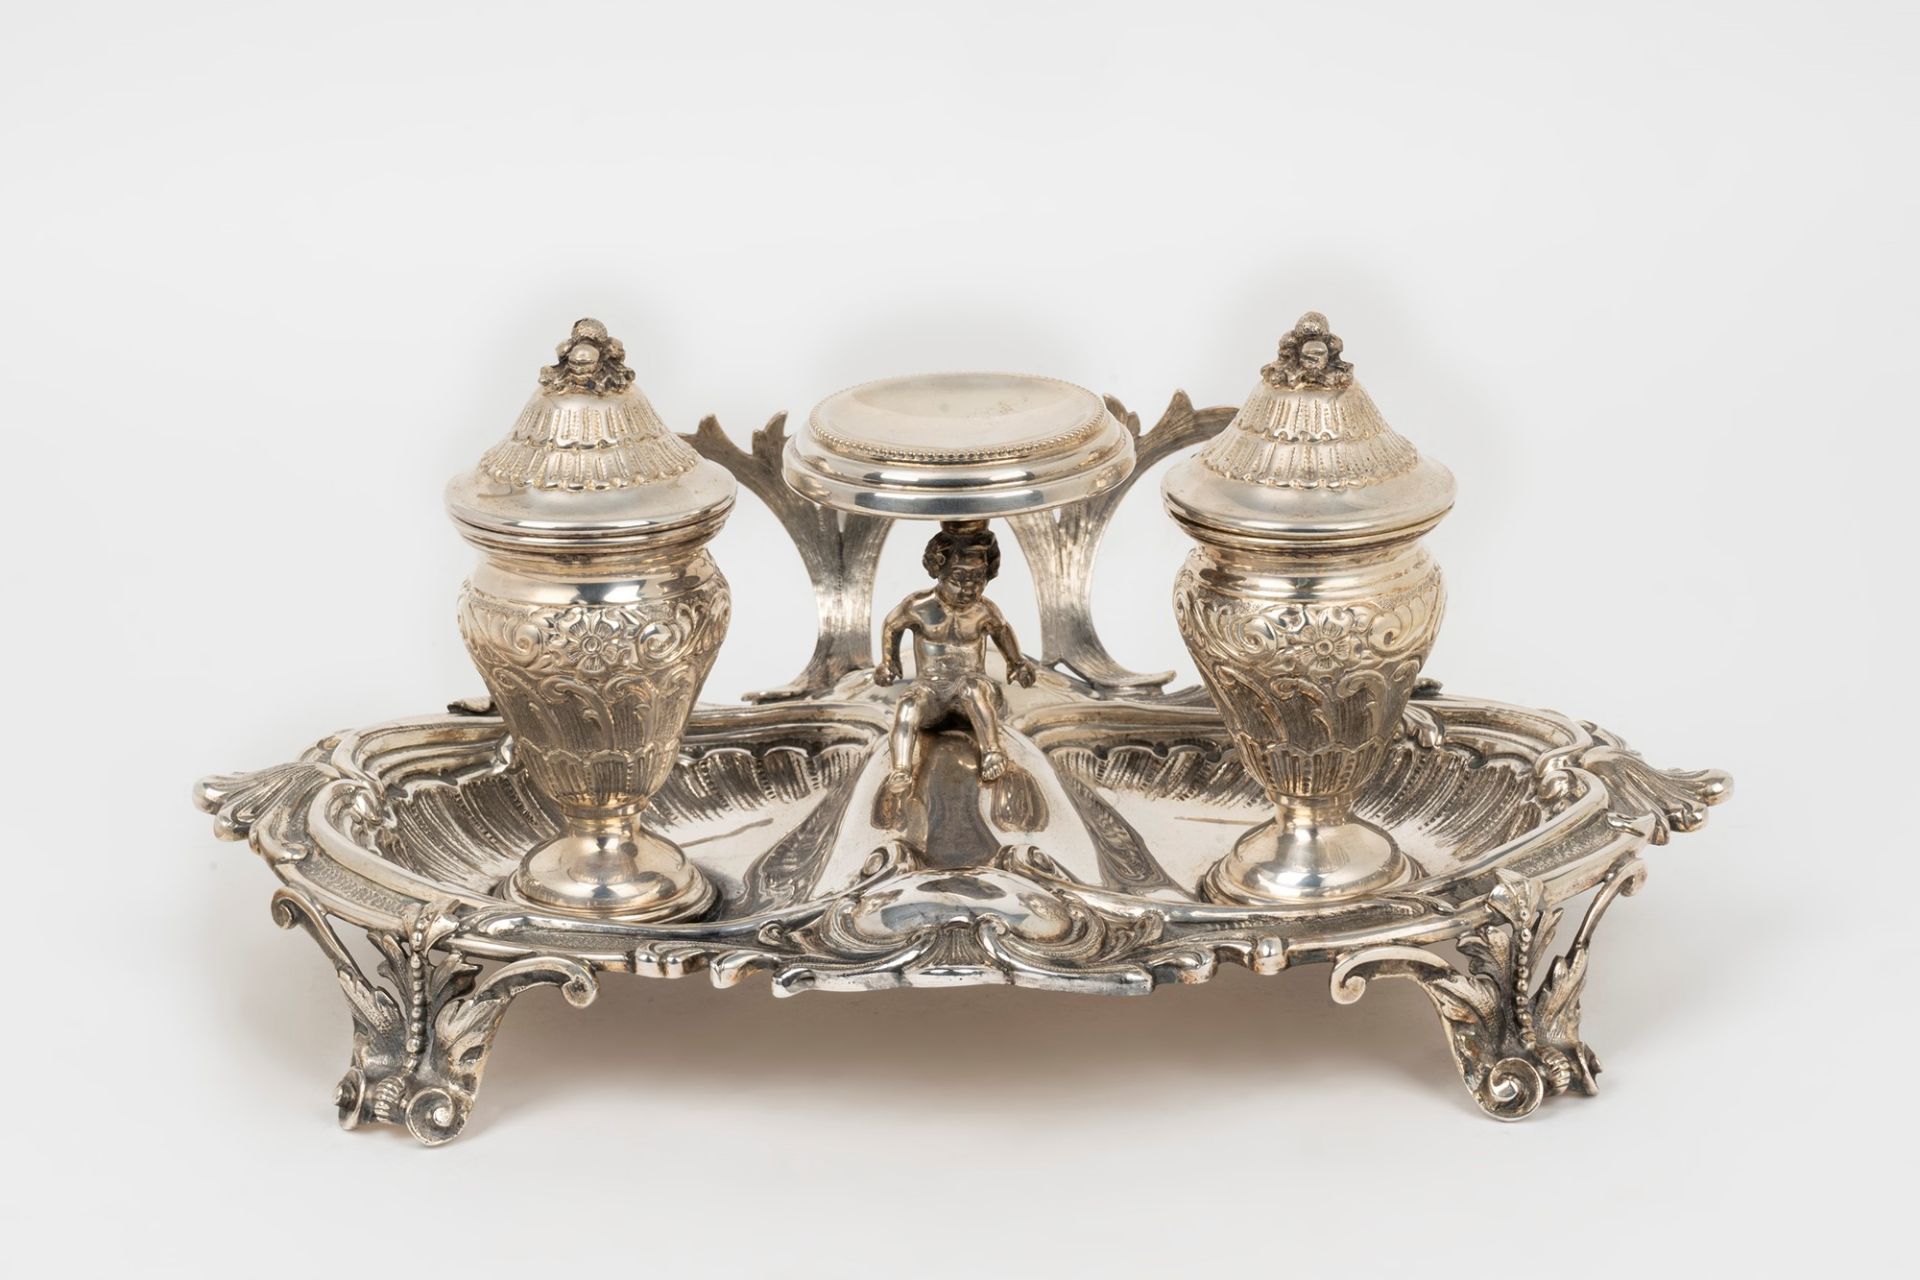 Silver inkwell, 20th century